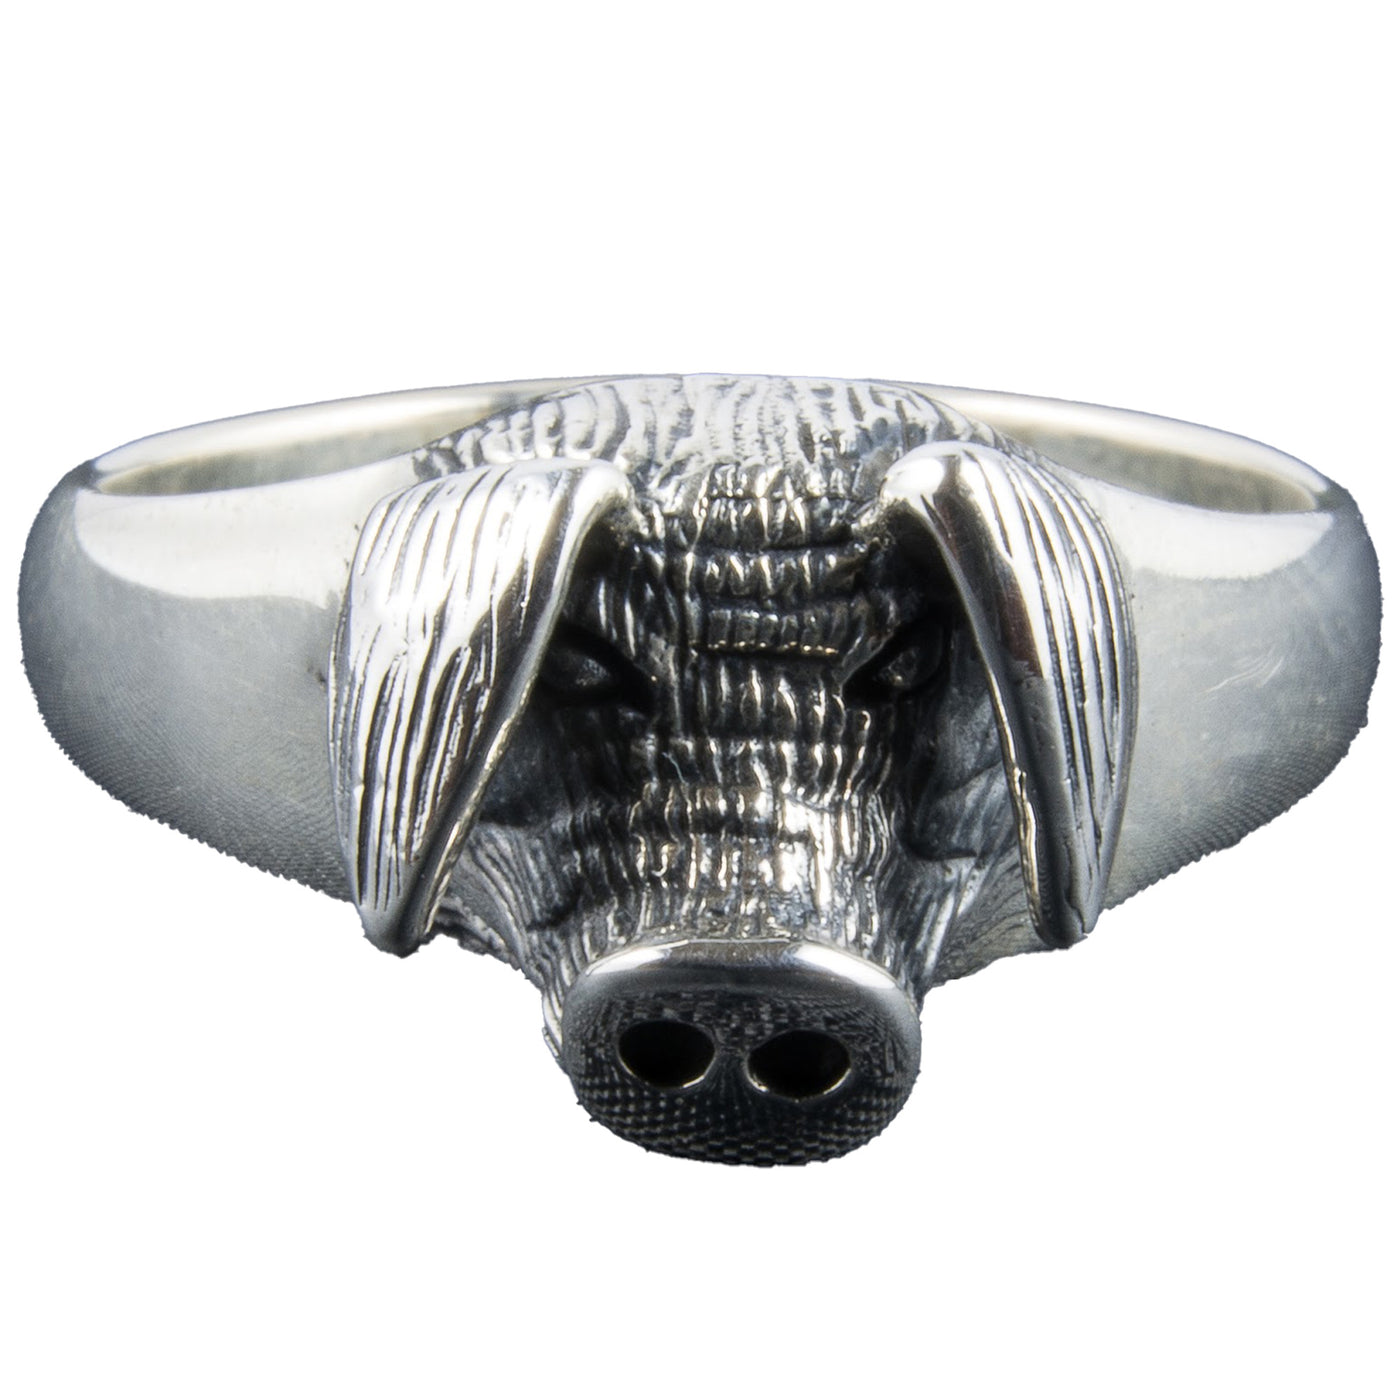 Farm Pig Ring ~ 925 sterling silver M-X Sizes Available